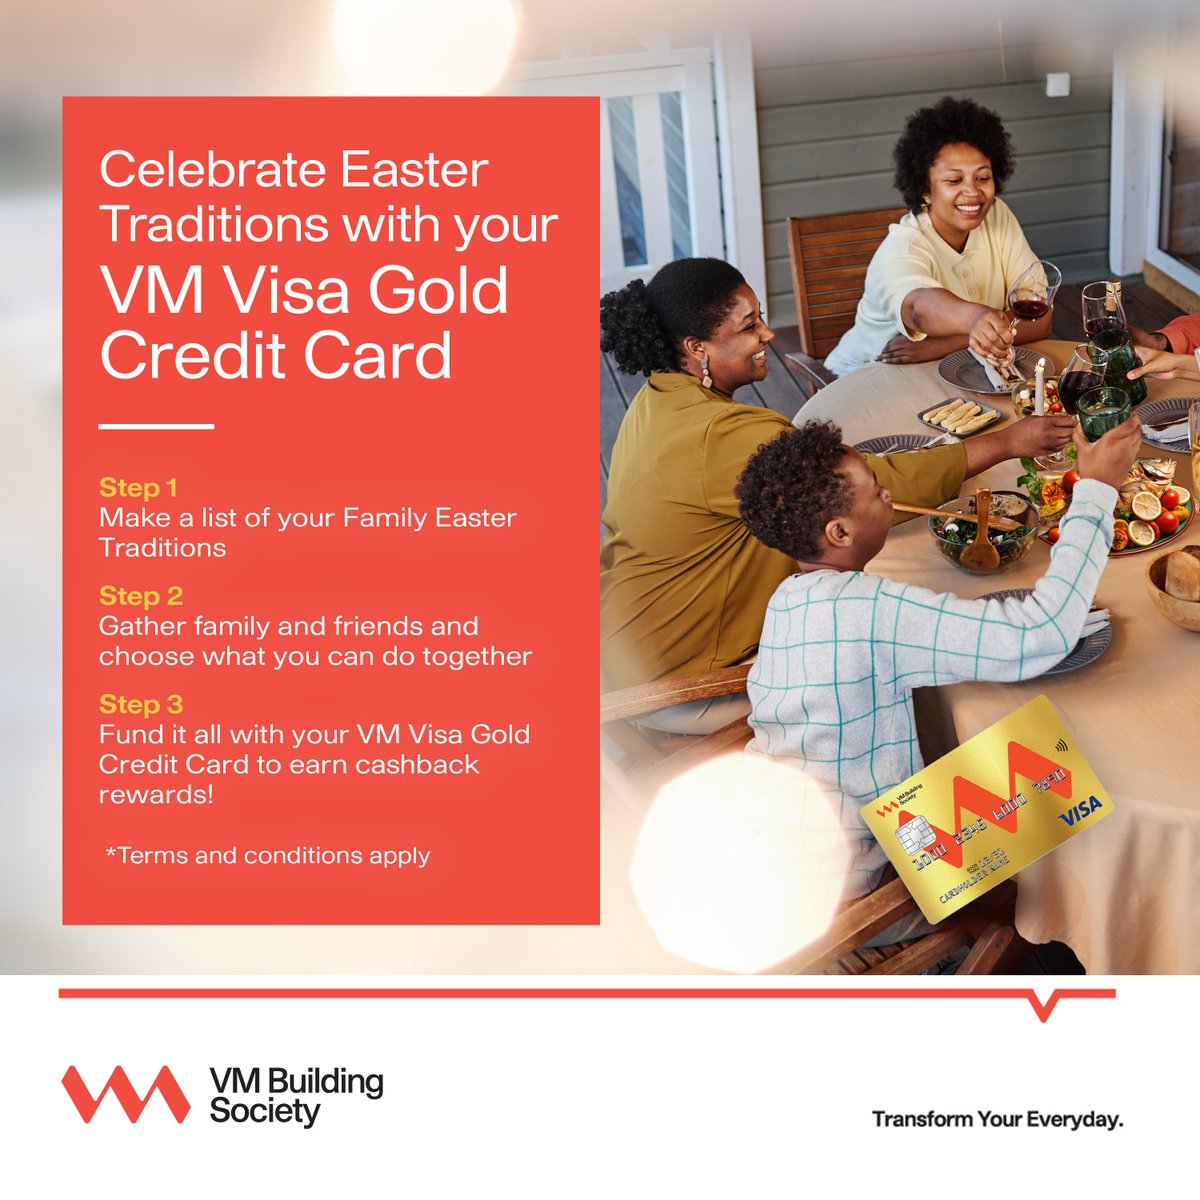 Make this Easter special for you and your family using your VM Visa Gold Credit Card to fund your Easter family traditions. Enjoy points towards your cashback rewards each time you tap, insert or swipe your credit card to make a purchase! Not yet a VM Visa Gold credit cardholder?…